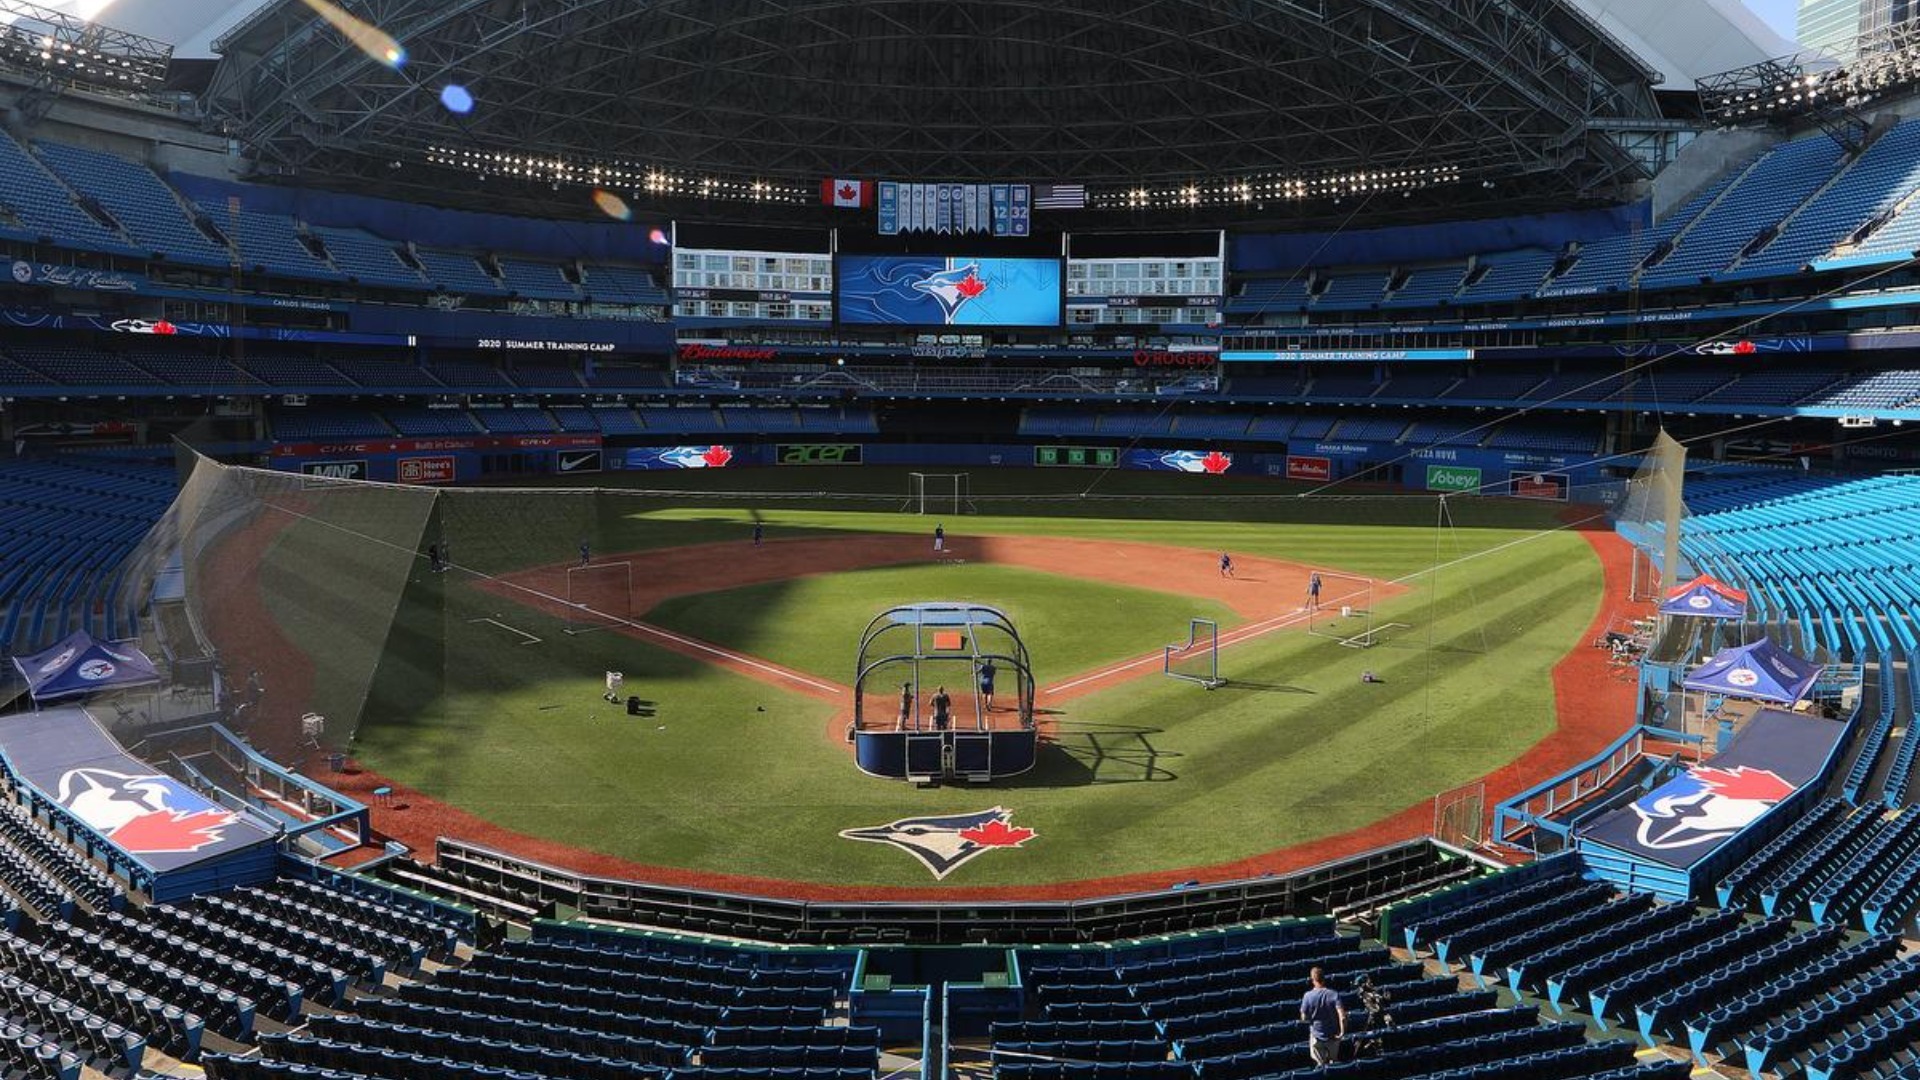 Rogers Centre/Skydome Renovations - Sports In General - Chris